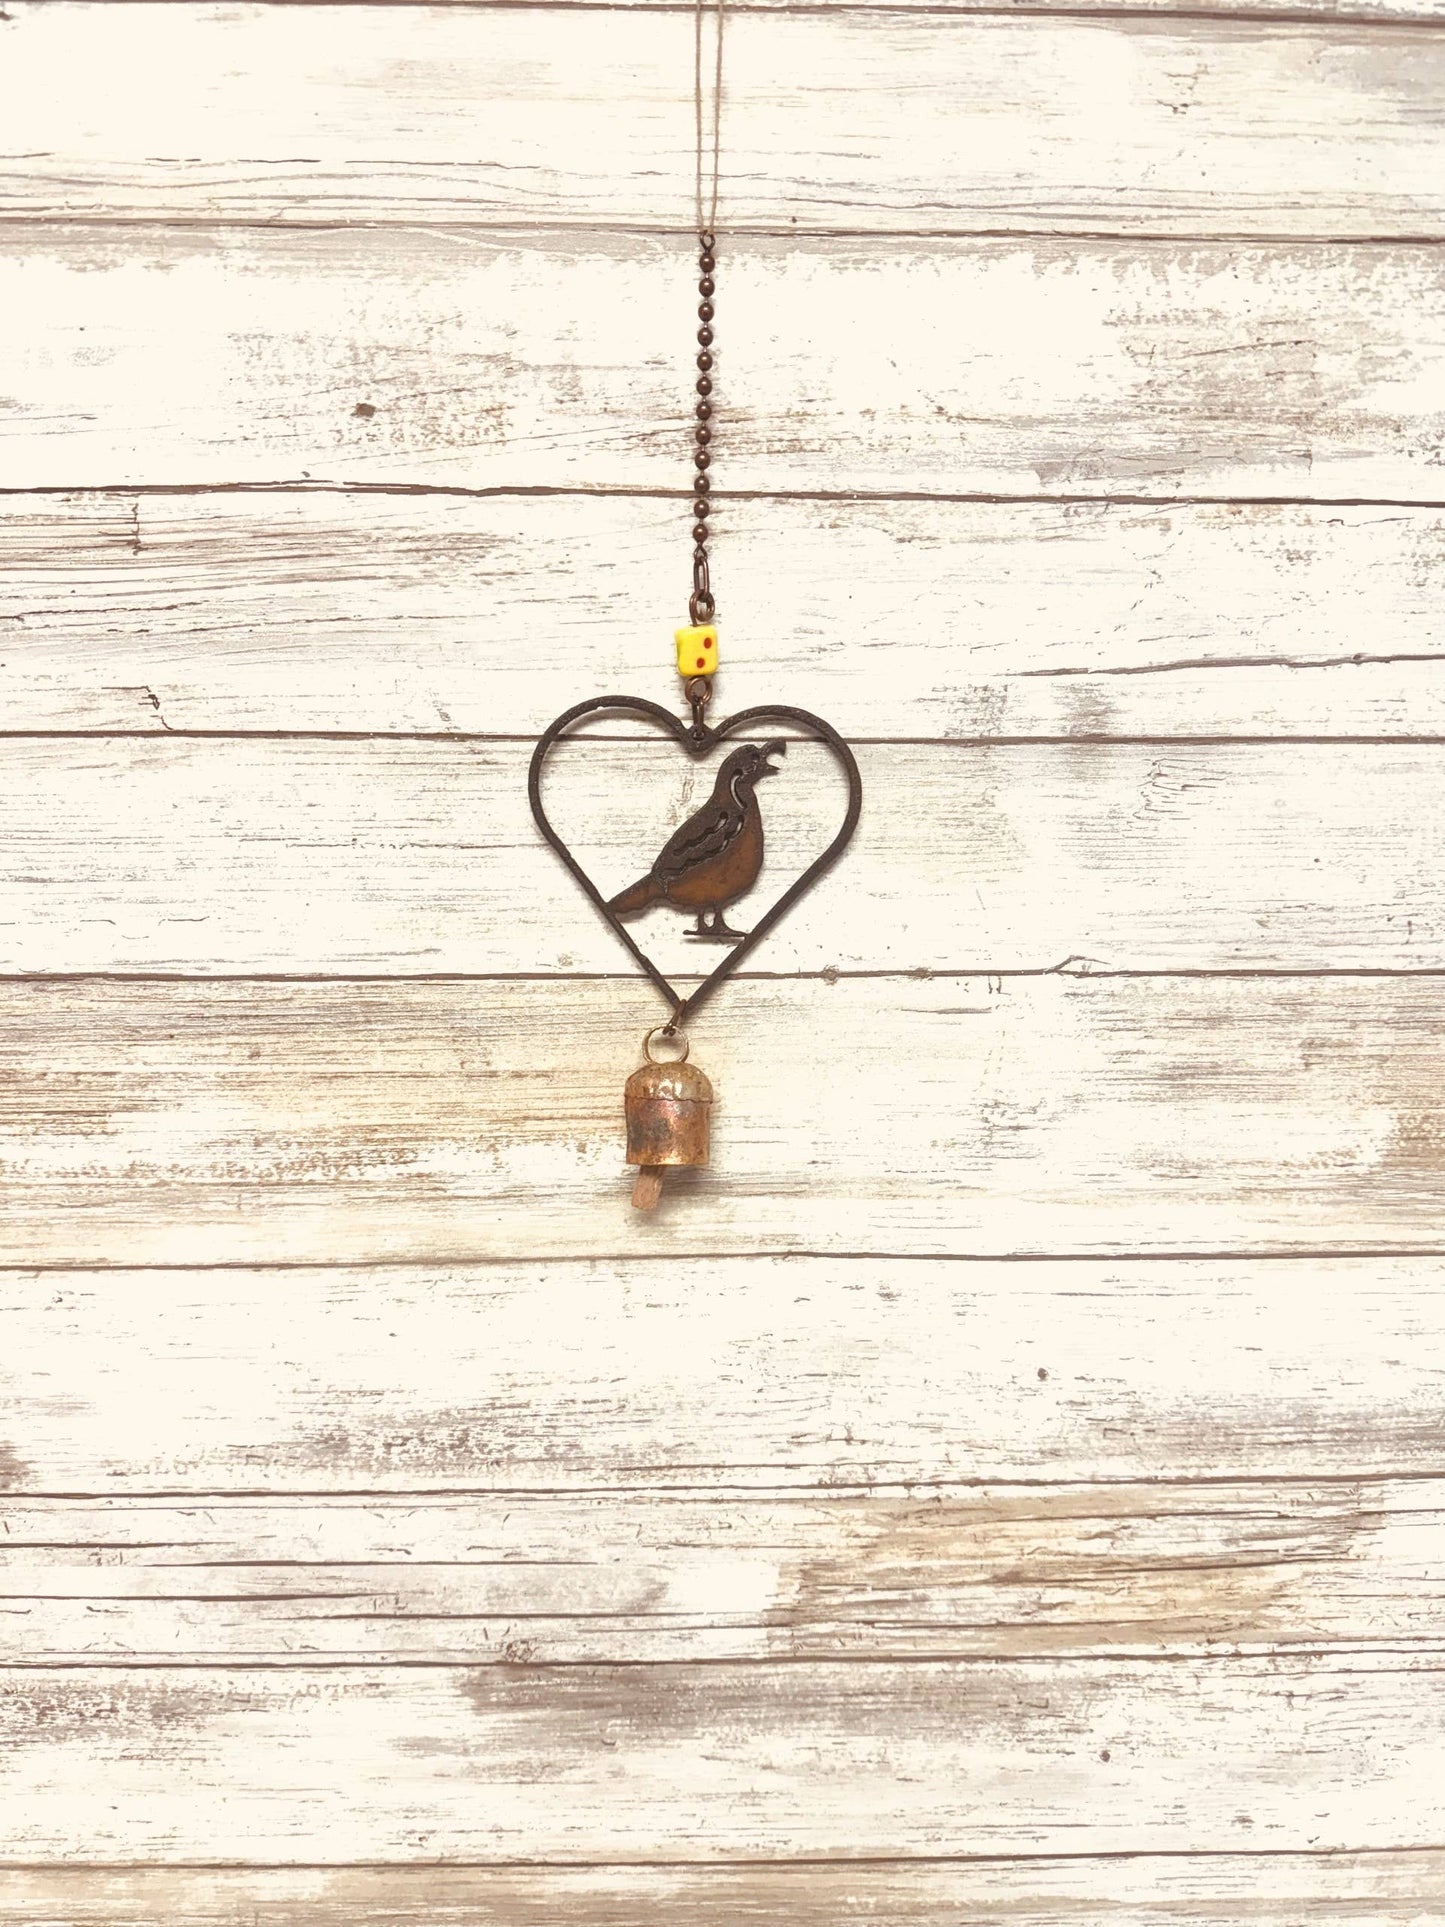 Heart Outline with Quail Desert Rustic Metal Garden Chime